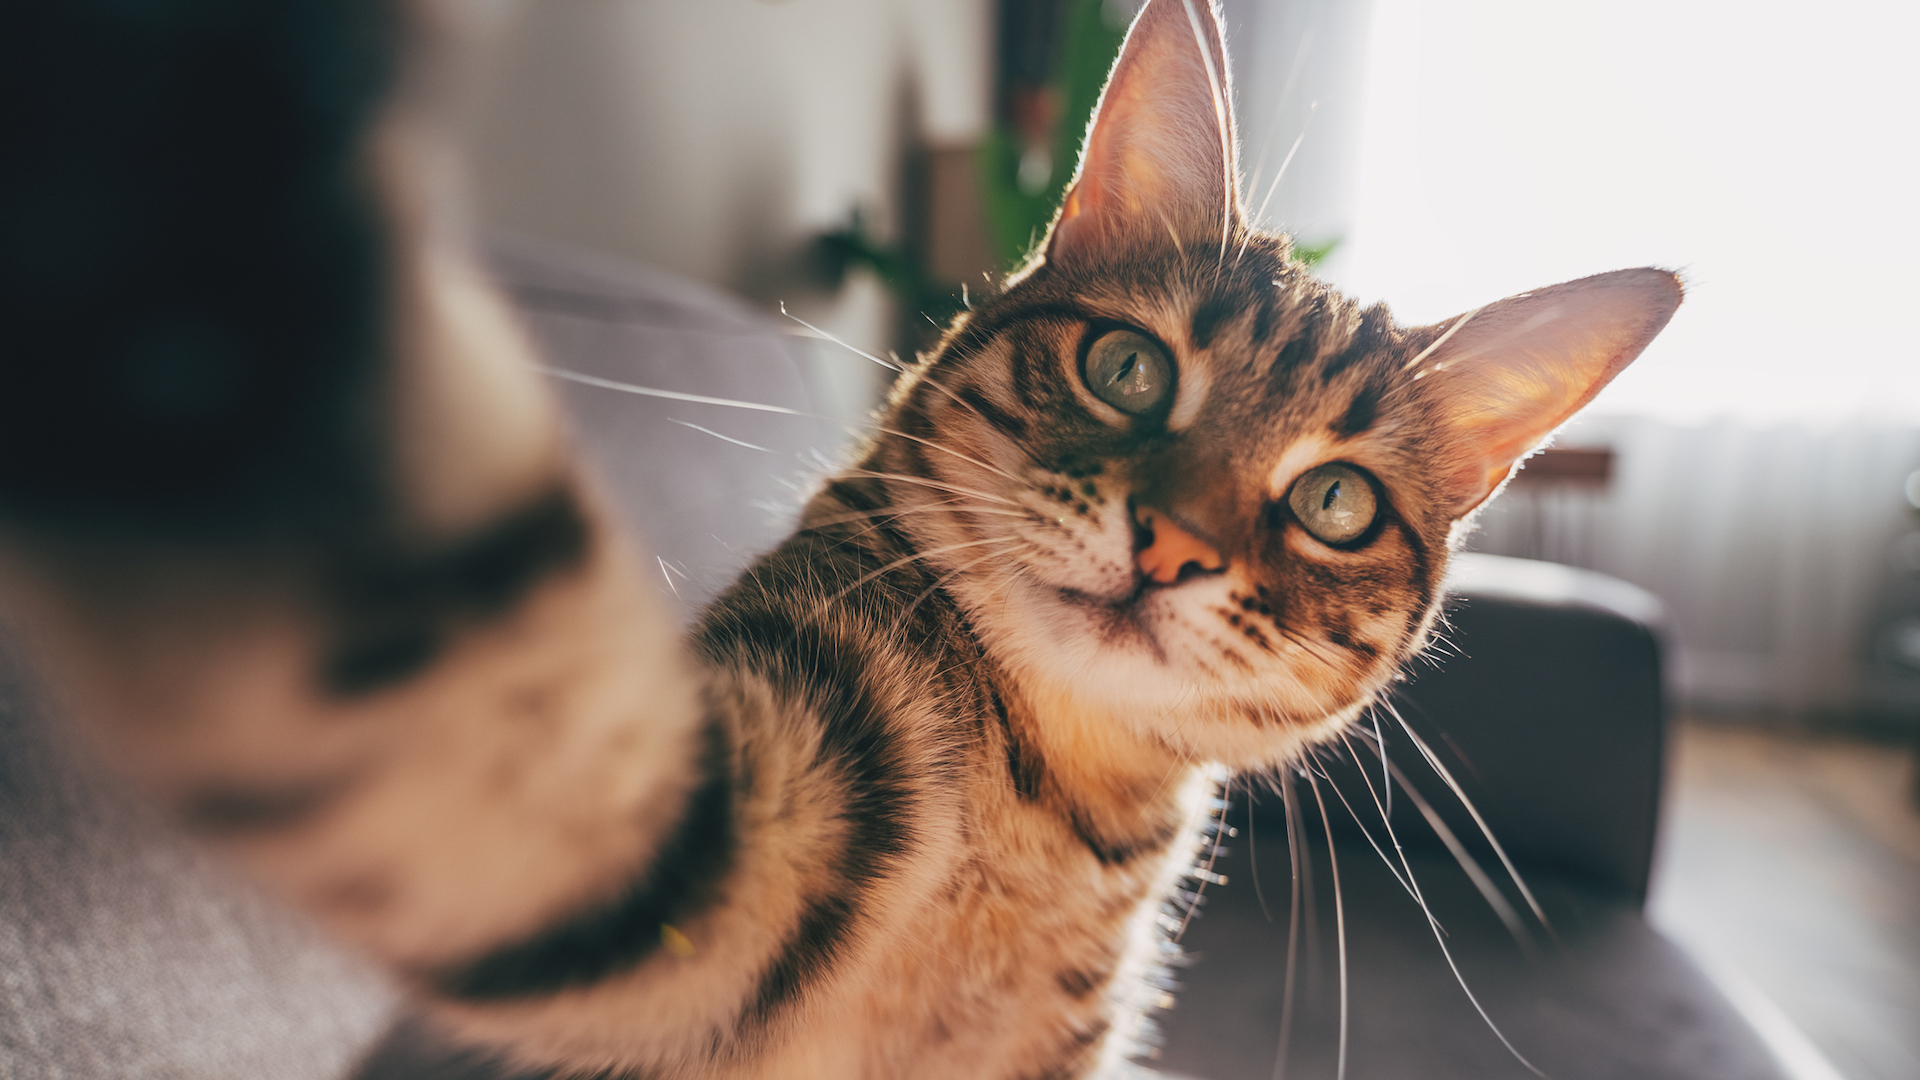 A photograph of a cat taking a selfie